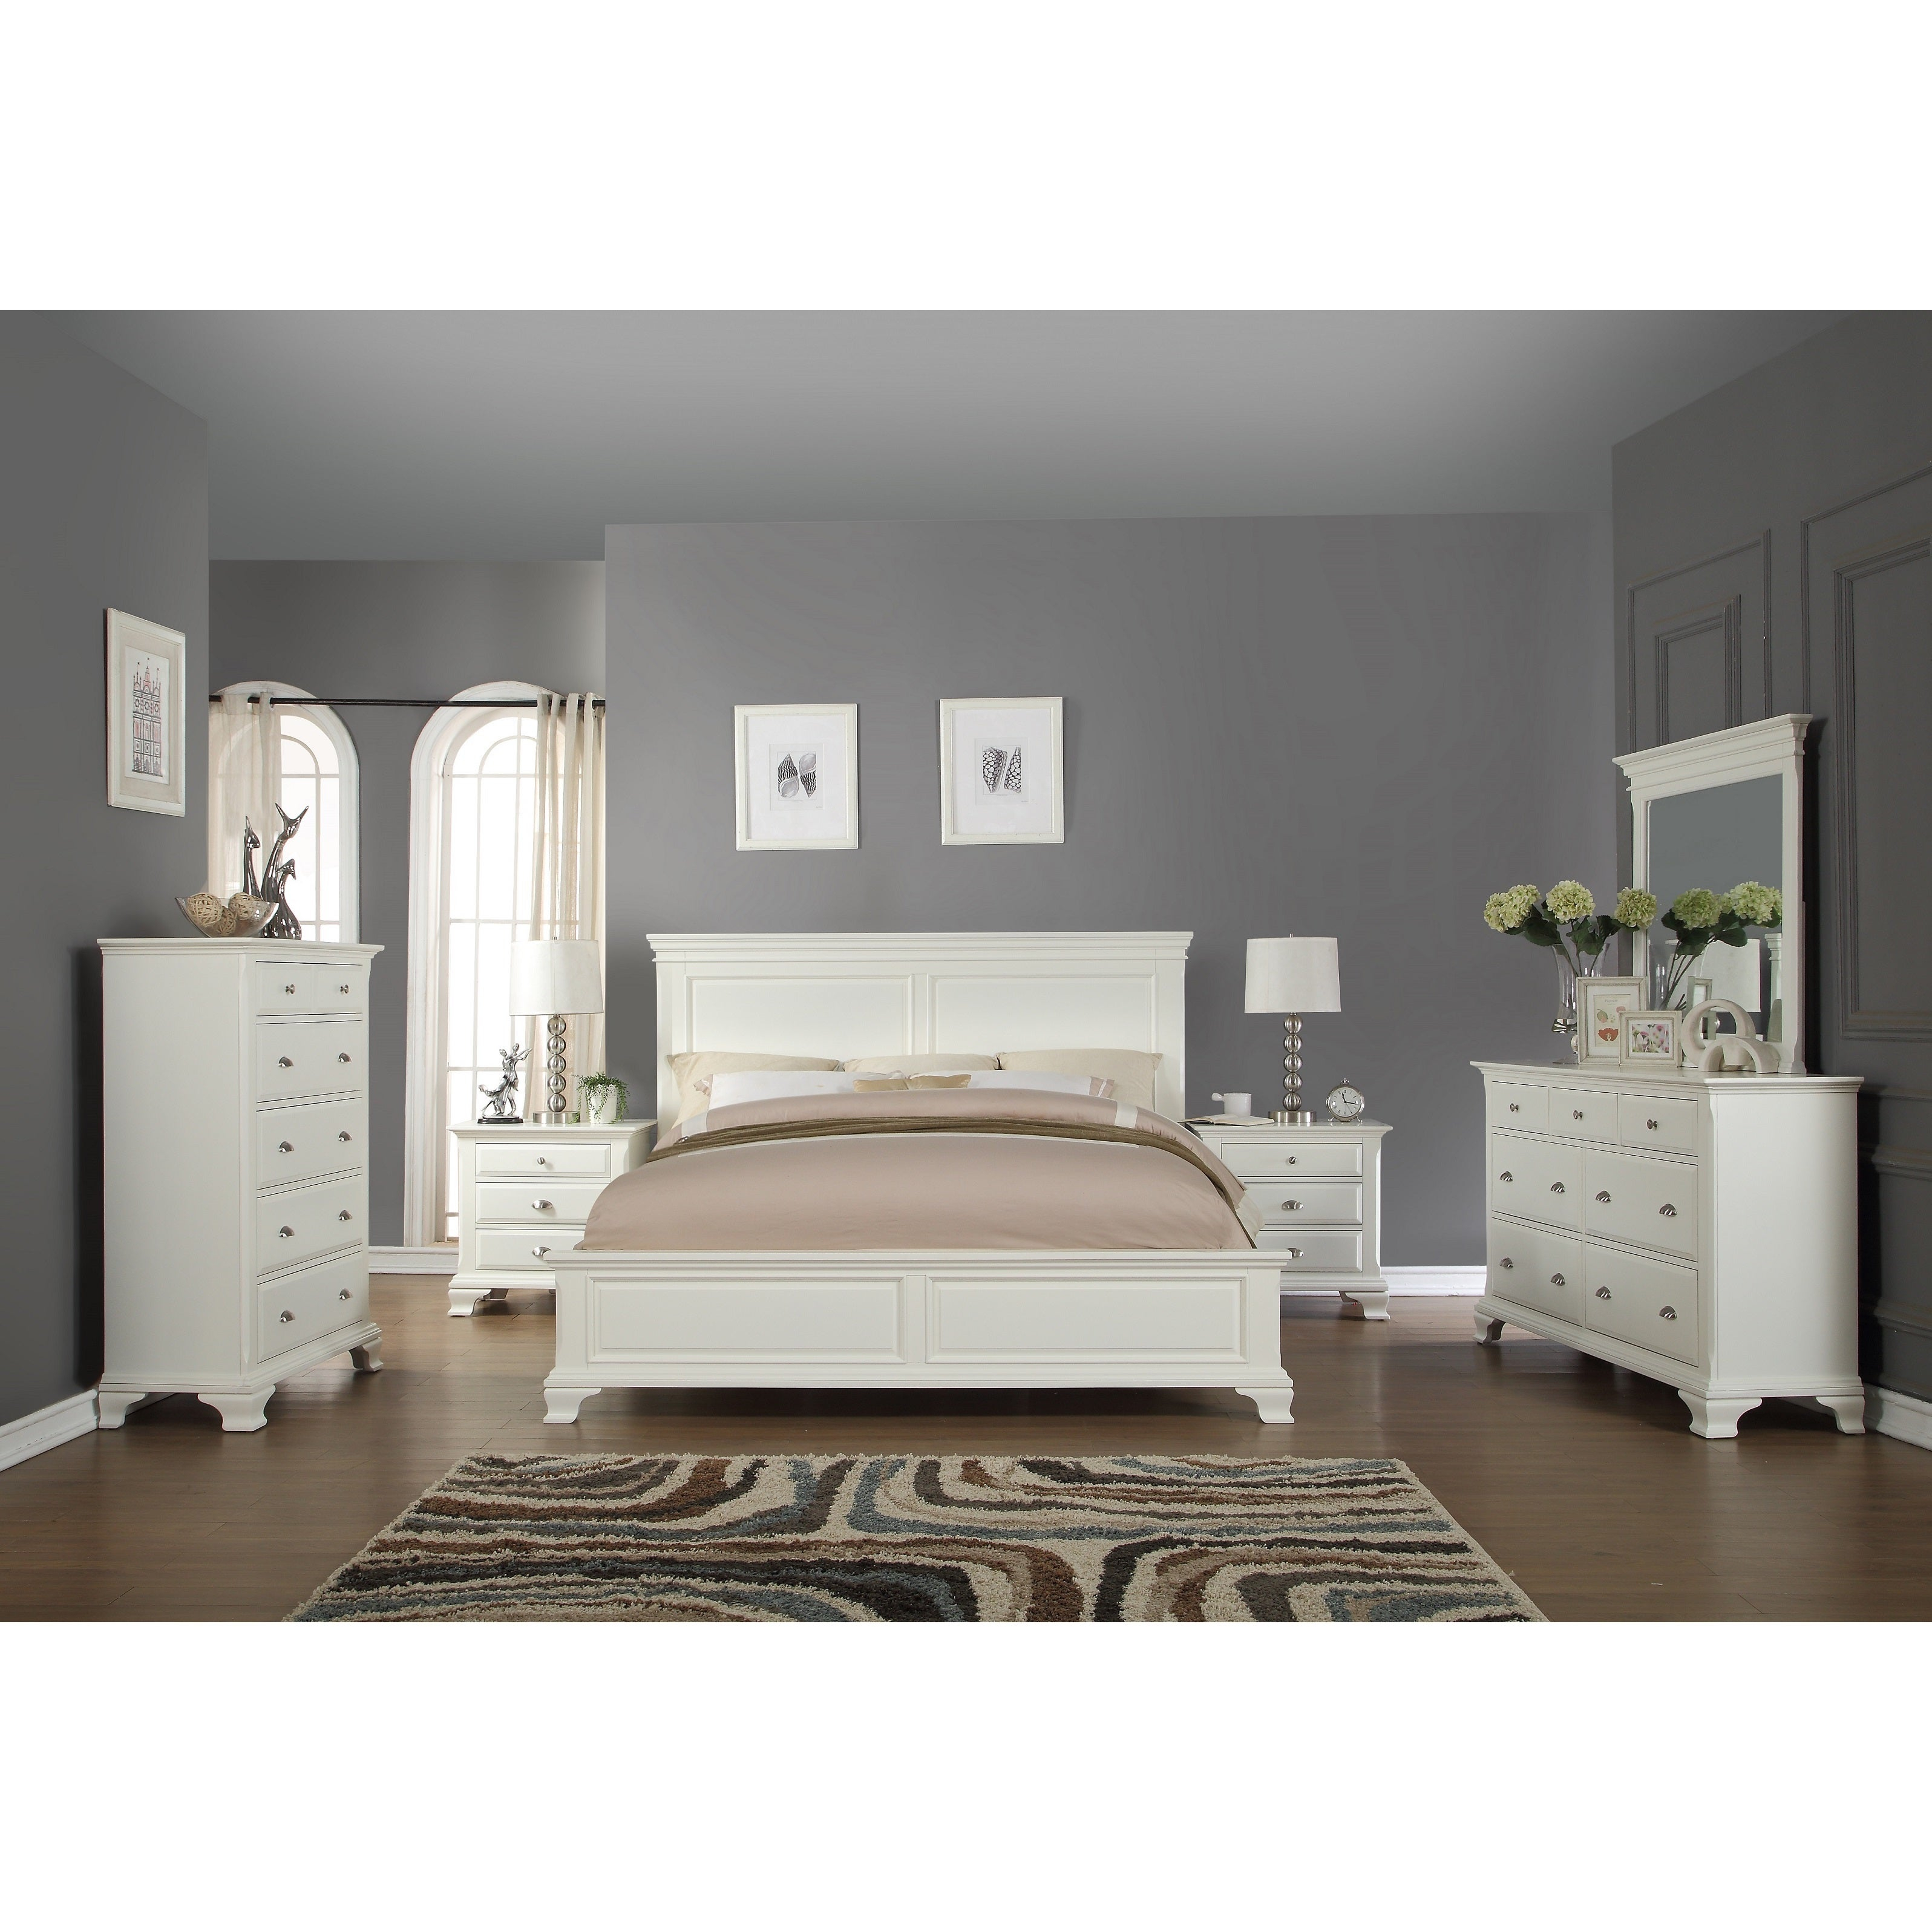 Laveno 012 White Wood Bedroom Furniture Set Includes King Bed Dresser Mirror 2 Night Stands And Chest pertaining to sizing 3193 X 3193